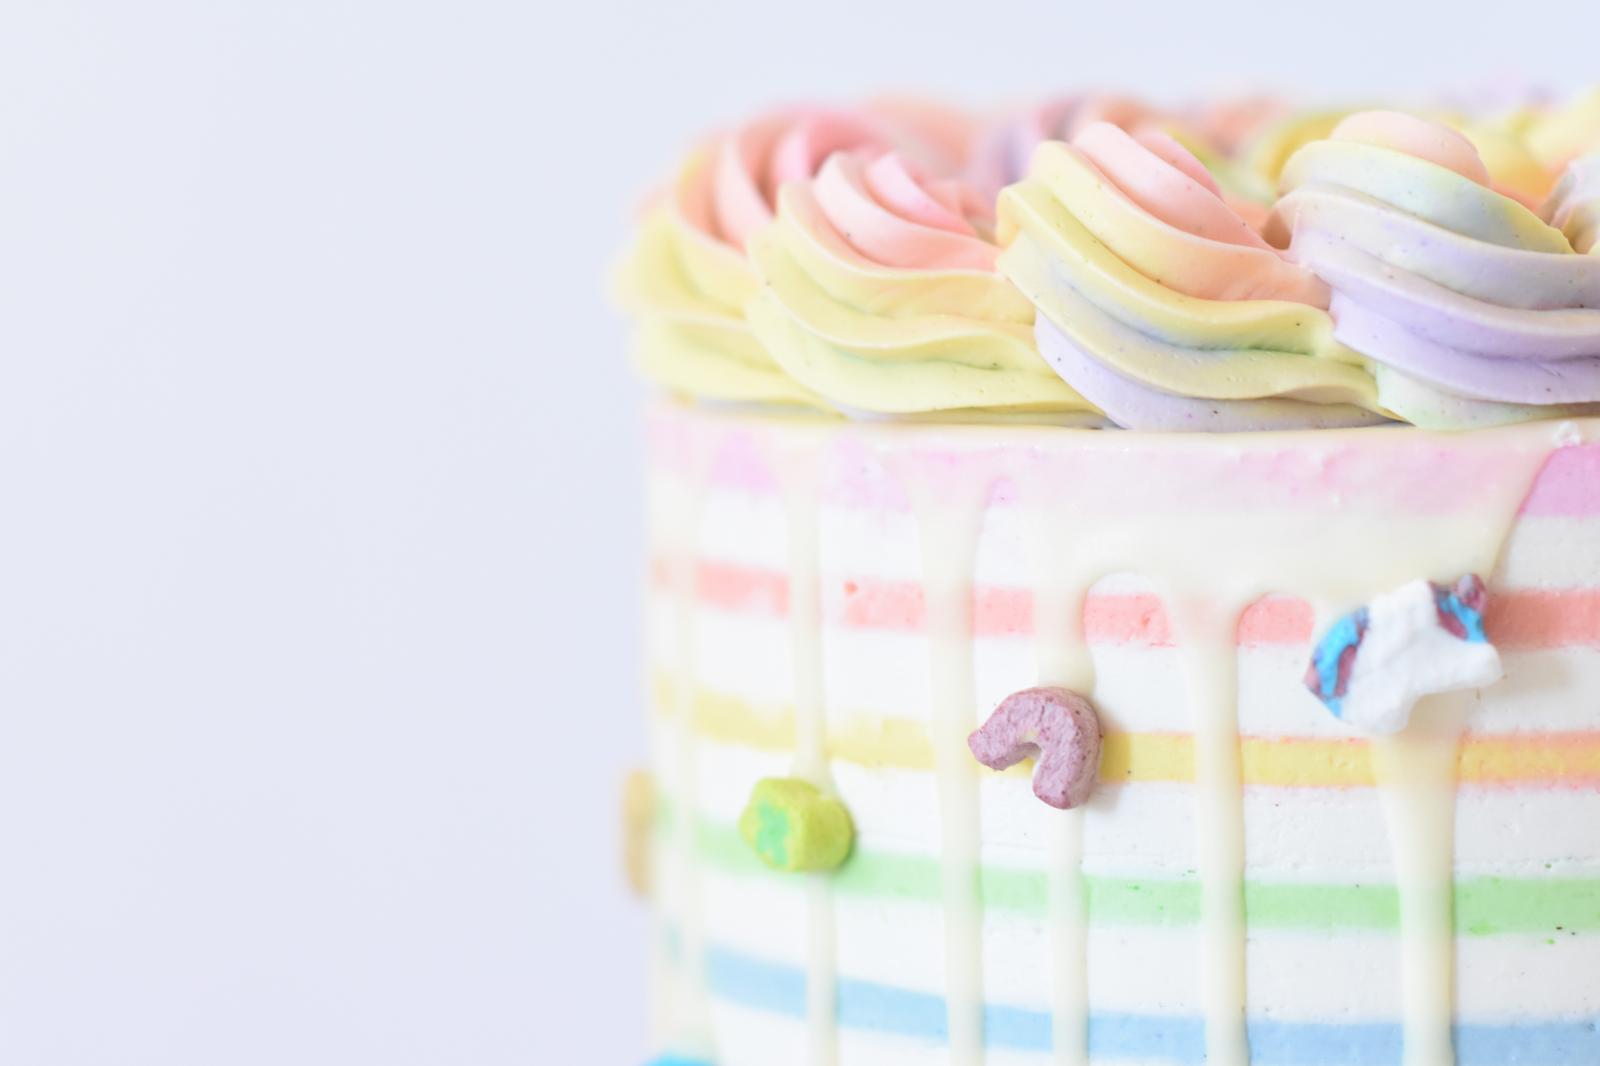 What C Drink Are You? Cotton candy cake